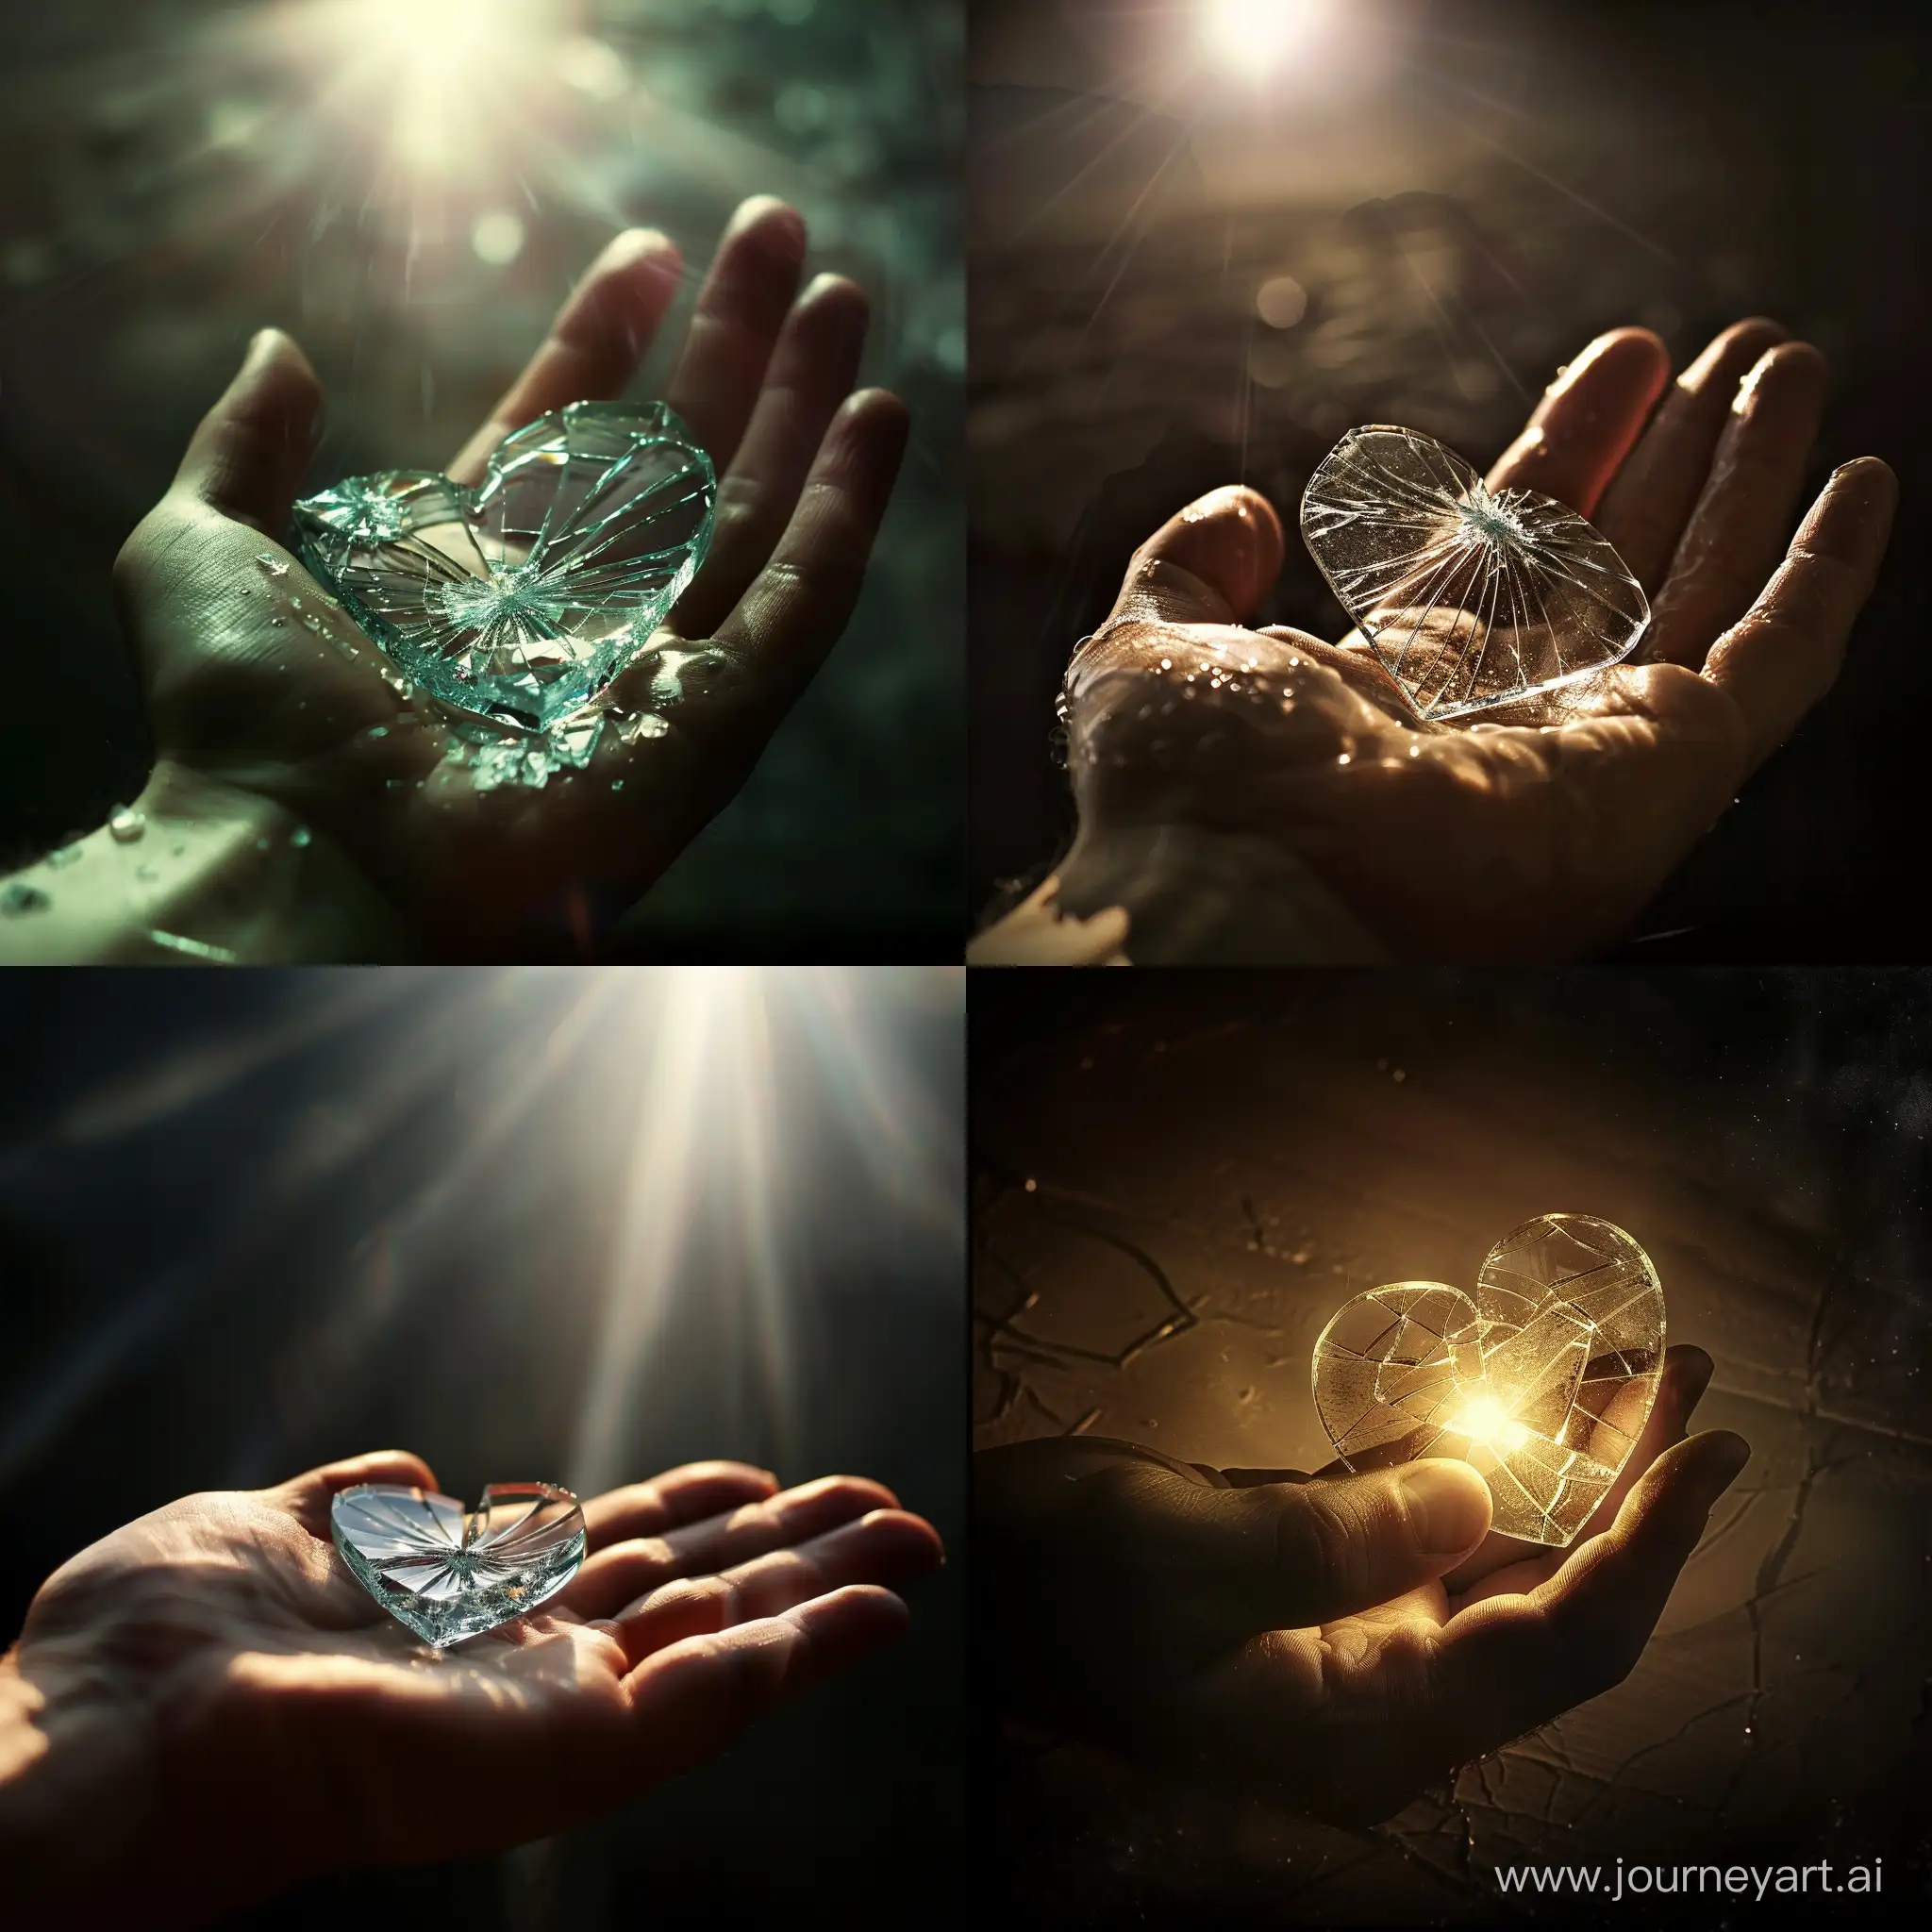 A broken glass heart rests on the hand, the light shines down dimly.